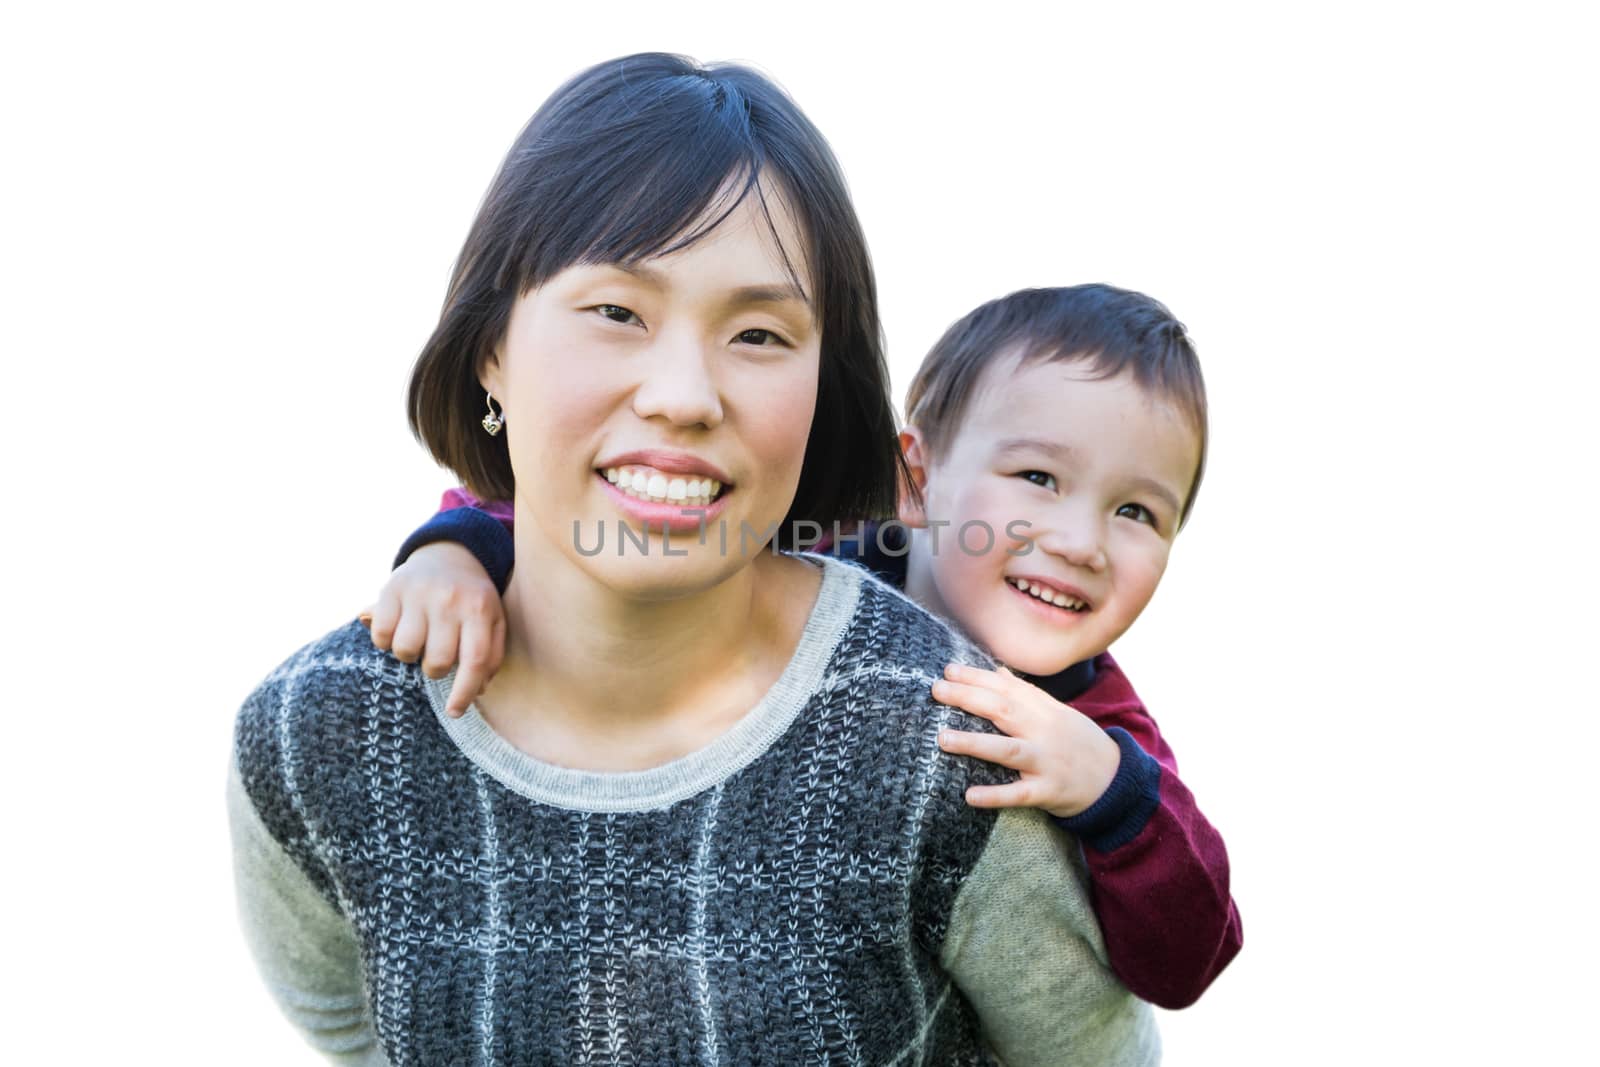 Chinese Mother and Mixed Race Child Isolated on a White Background.